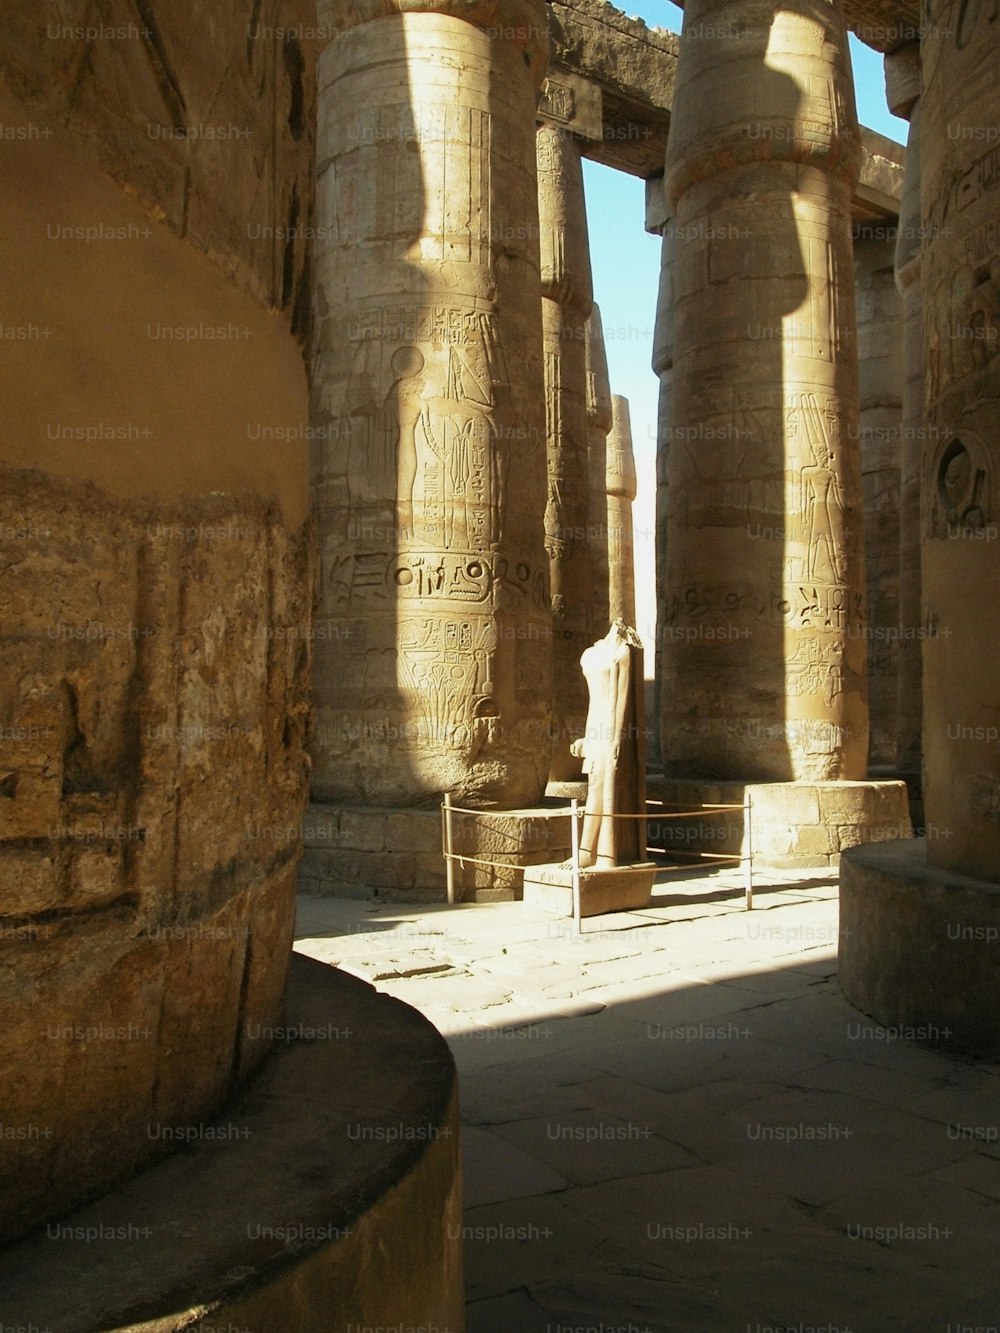 a statue of a man standing in between two large pillars